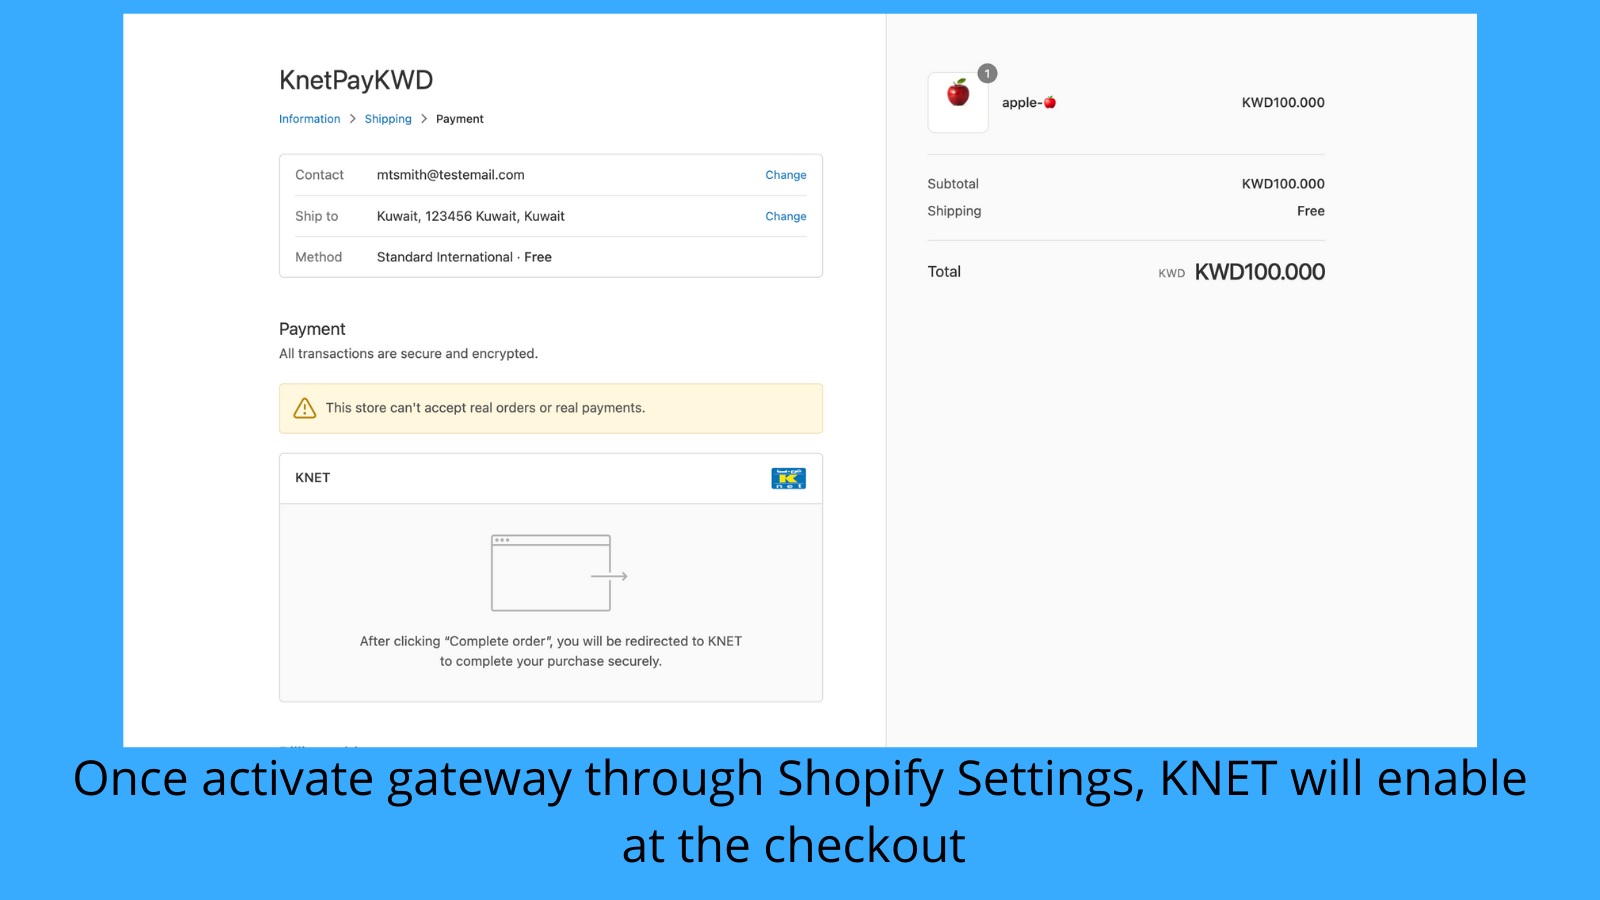 Enable KNET will at the checkout through Shopify settings.